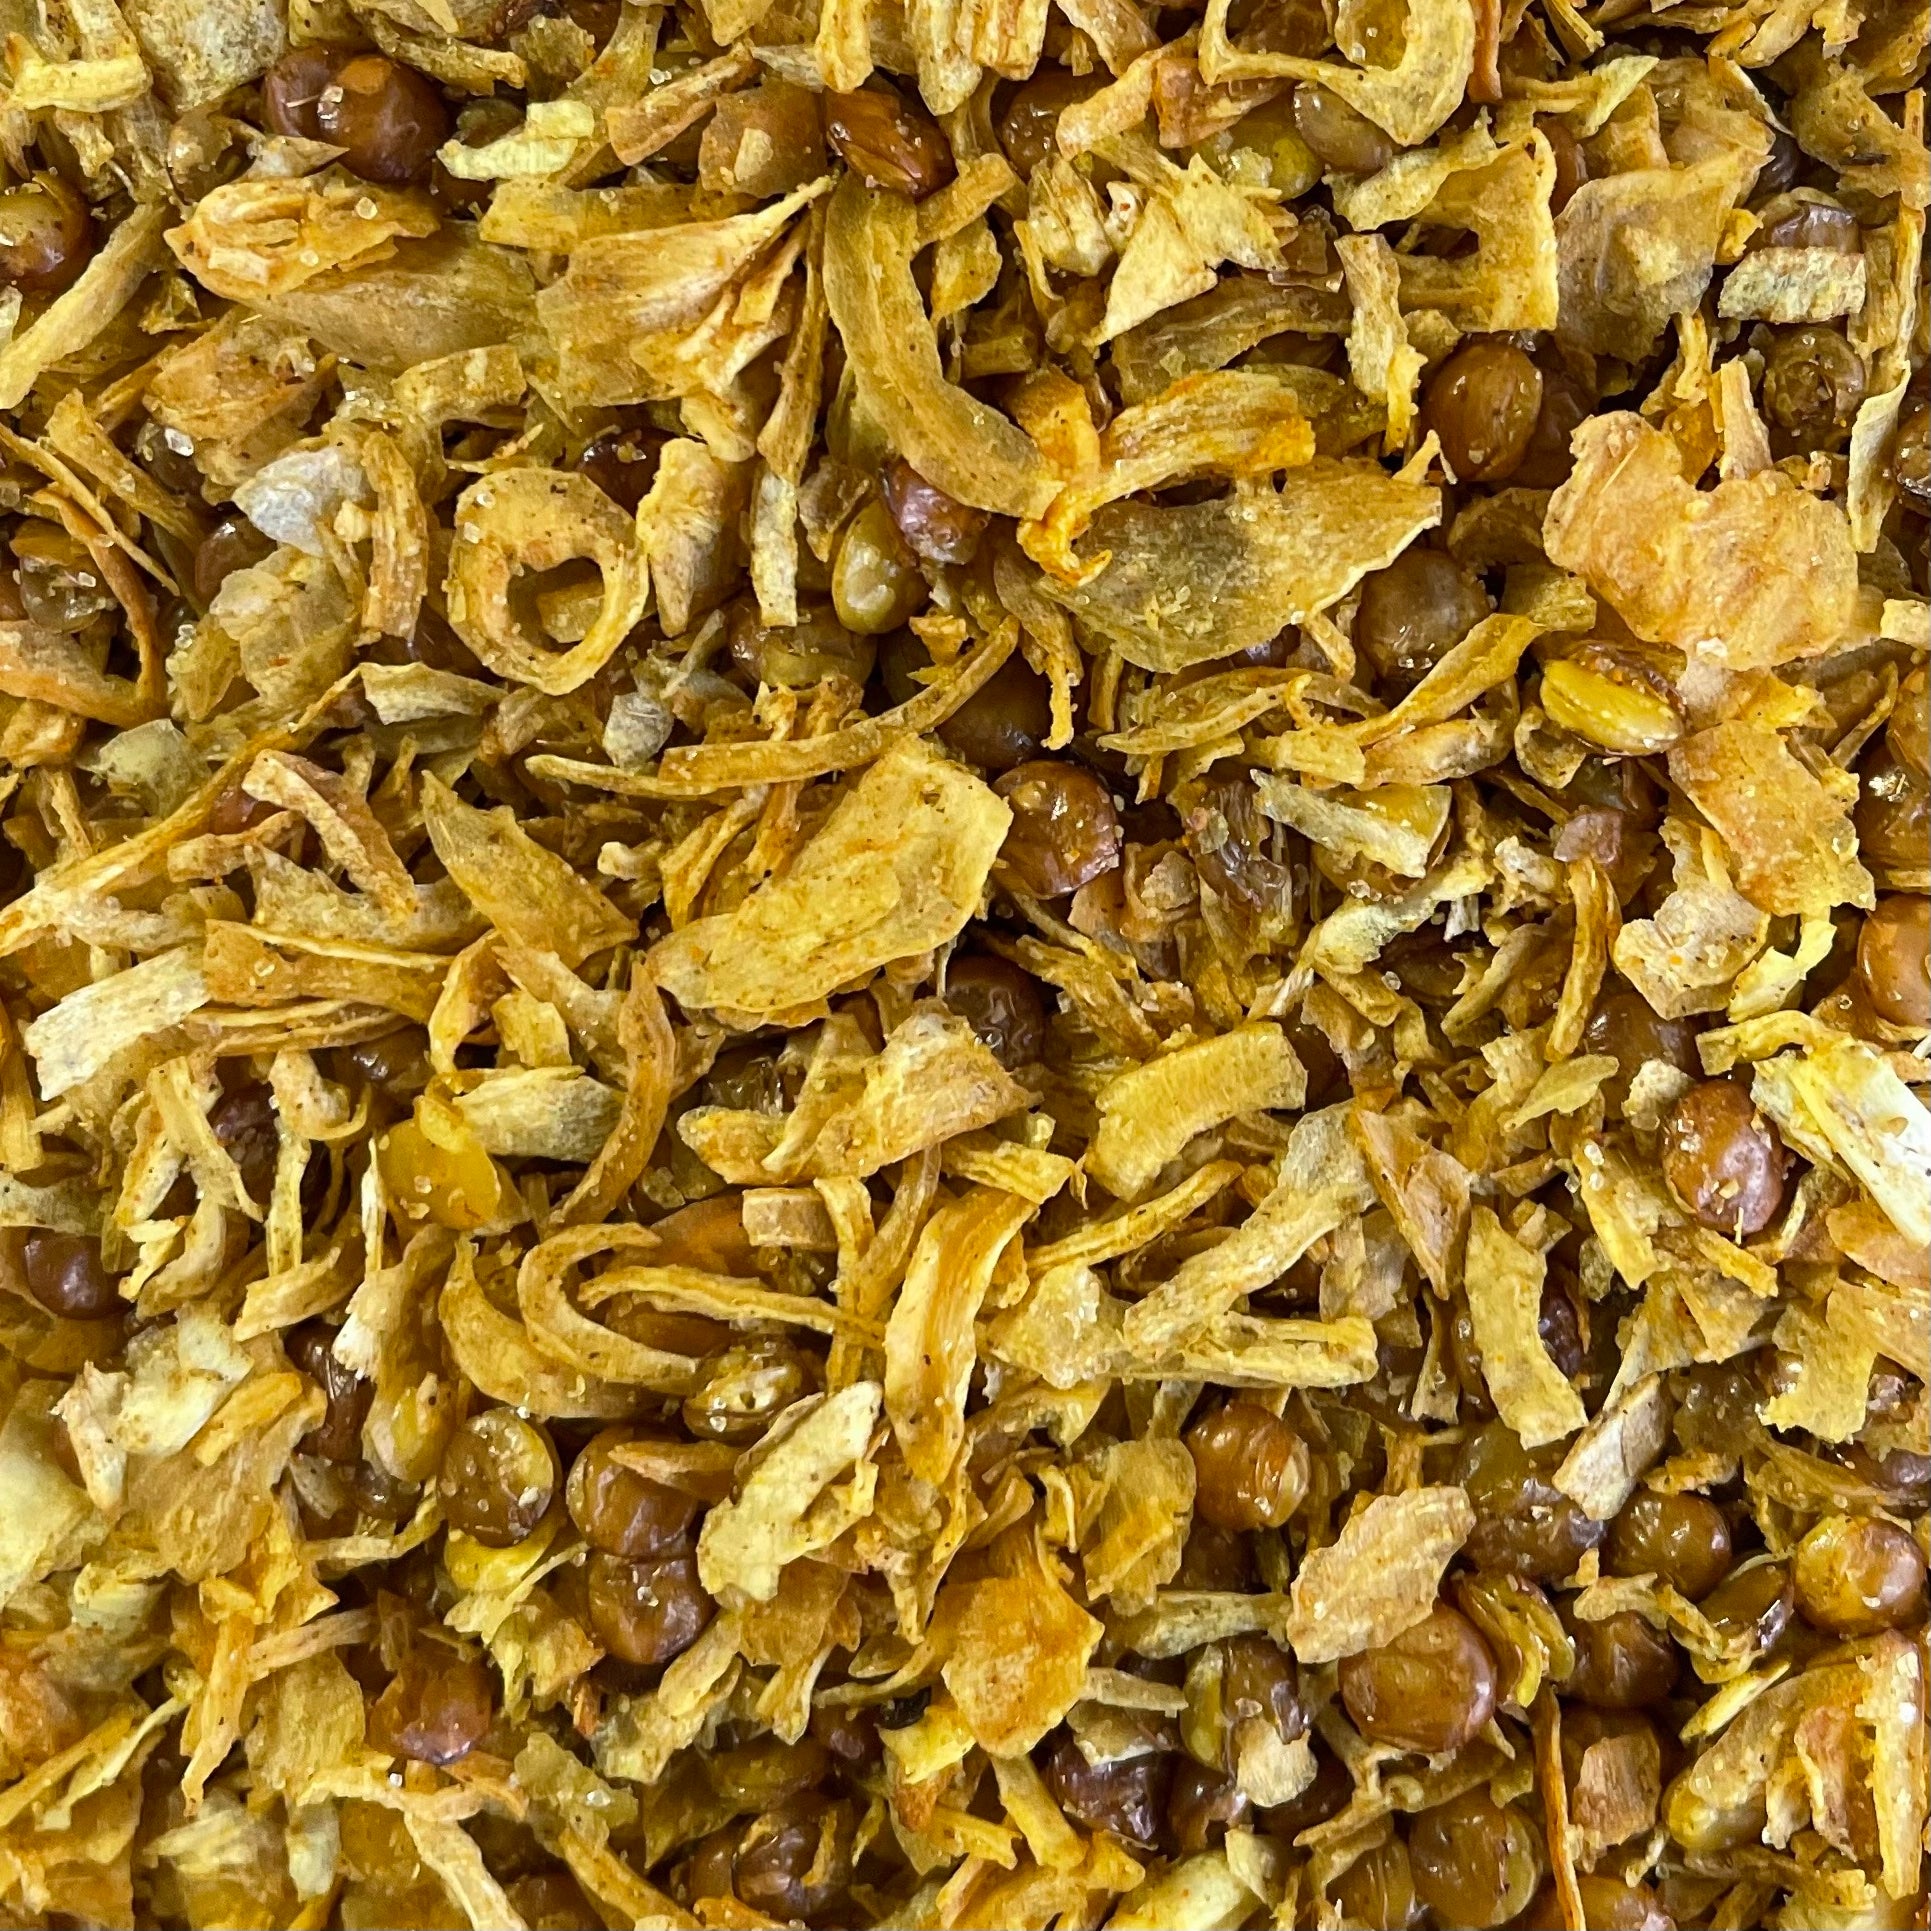 image of Egyptian spice crunch